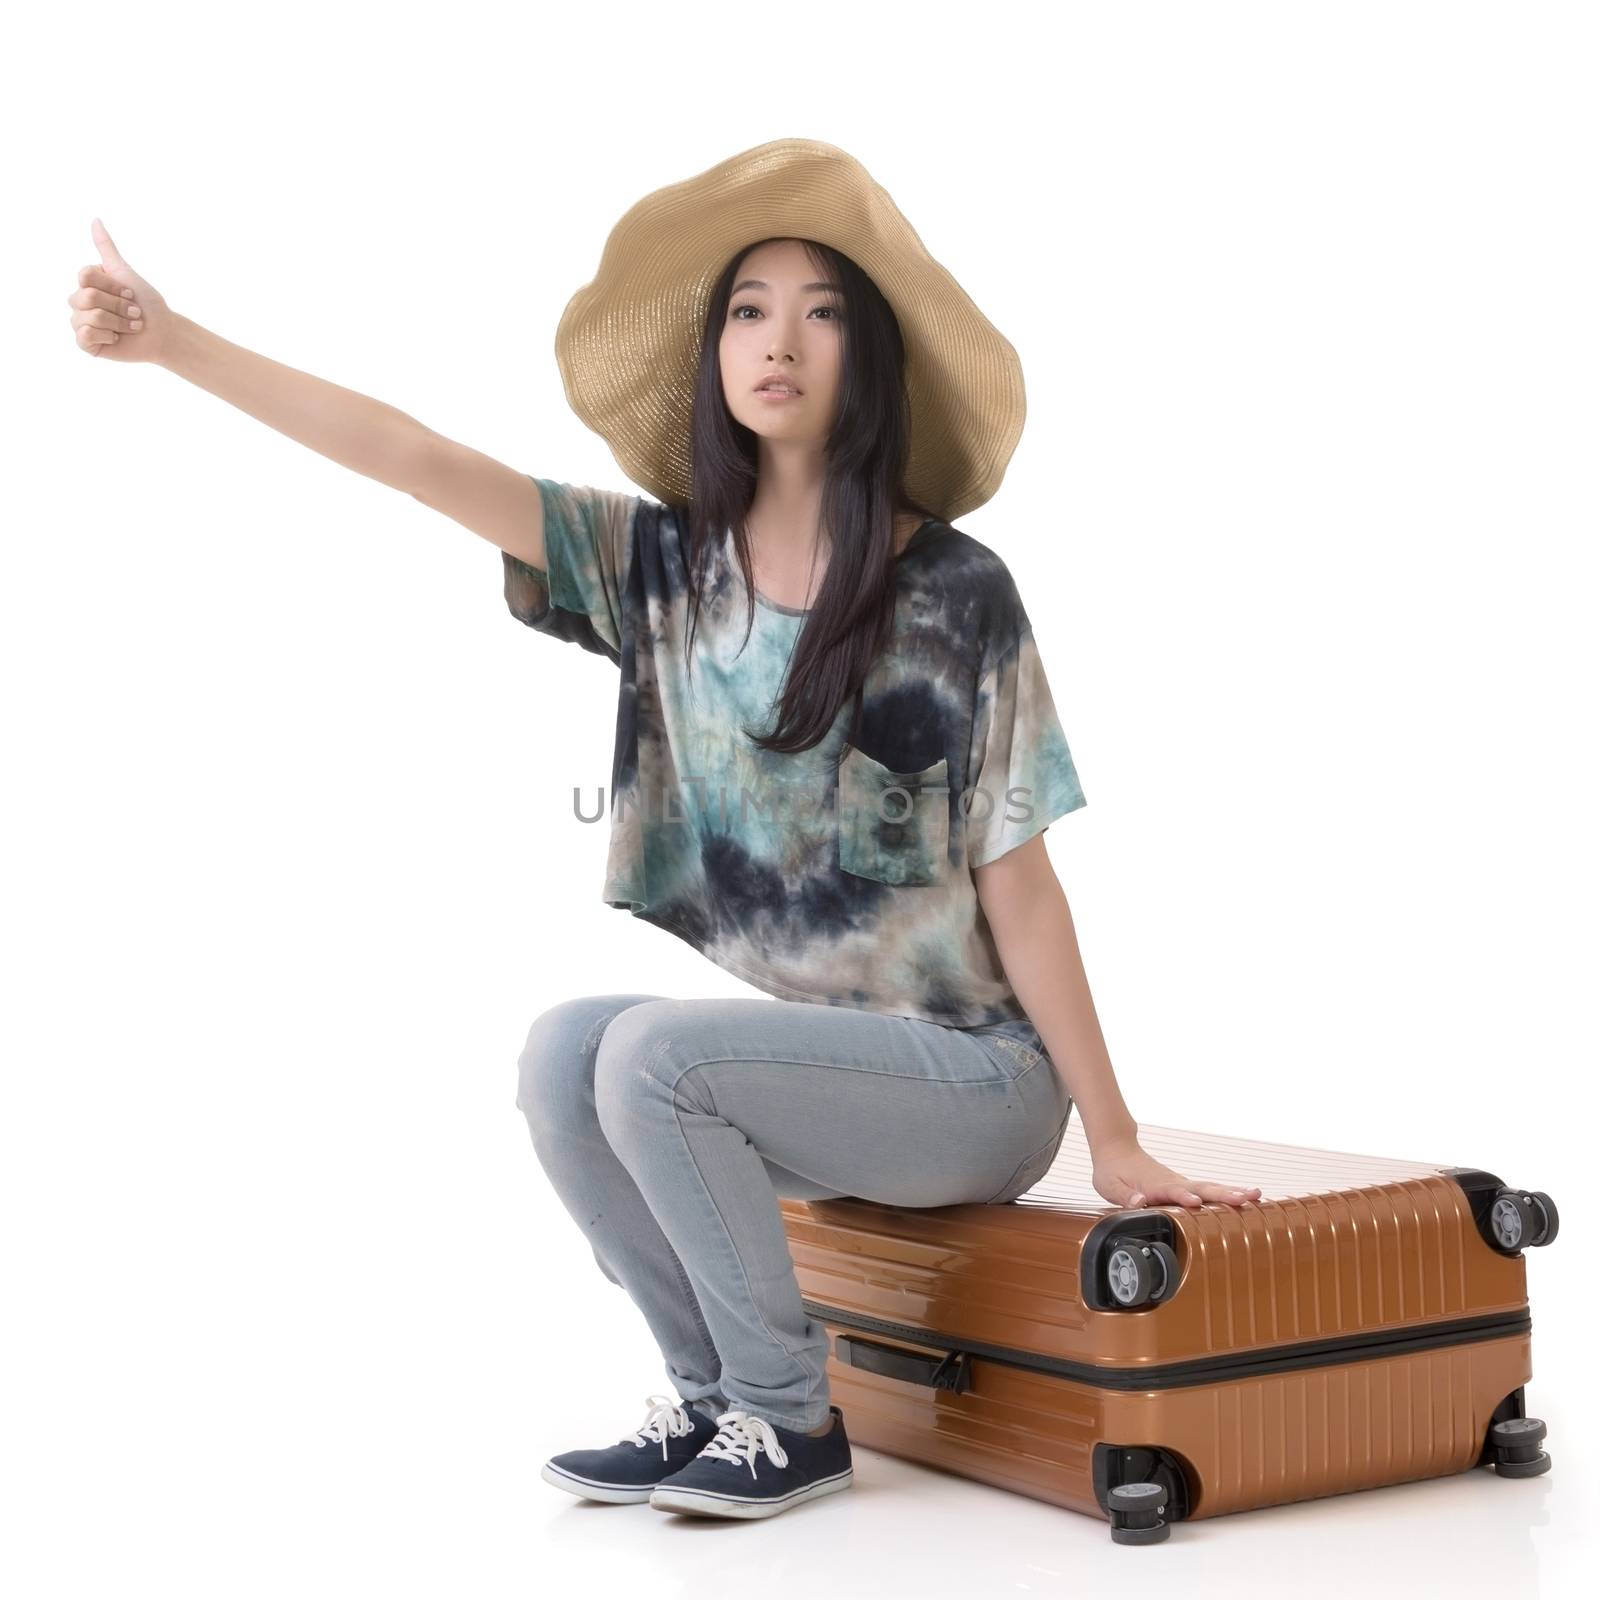 Asian young traveling woman hitchhiking, full length portrait isolated on white.